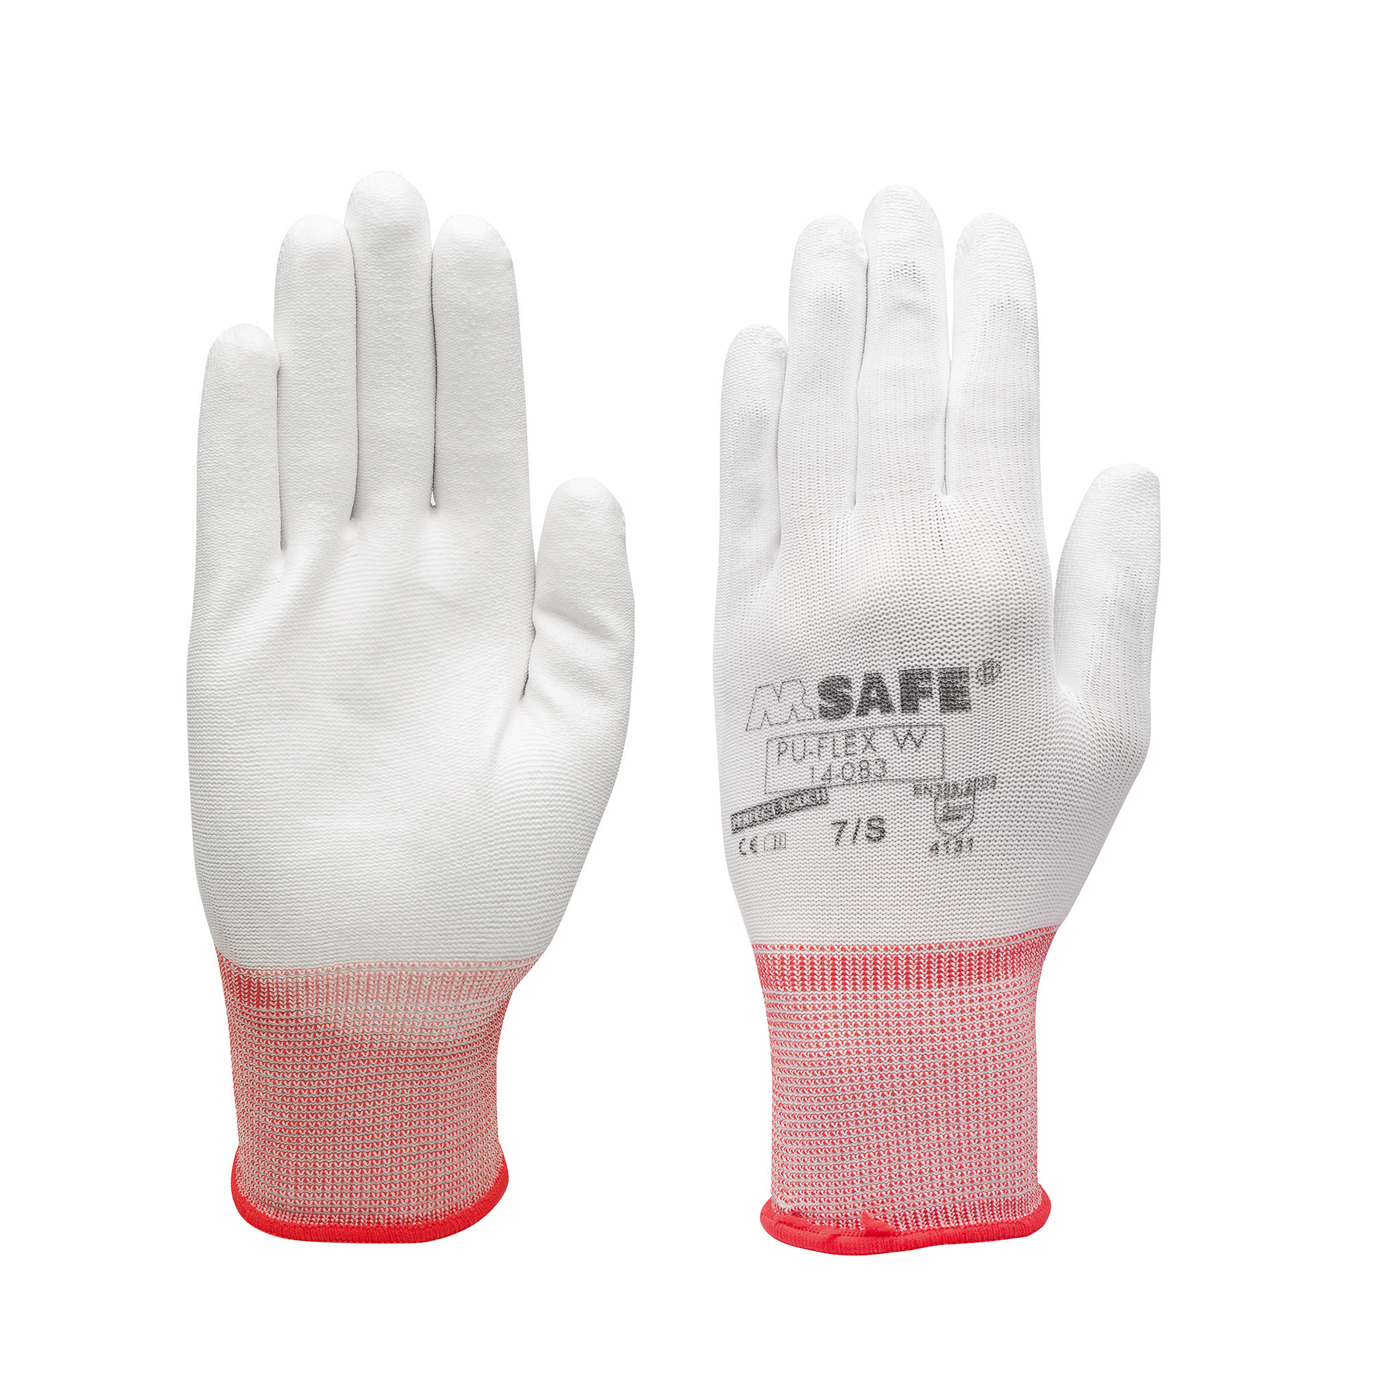 Polishing Gloves, Size S, White with red Wristband - 1 pair